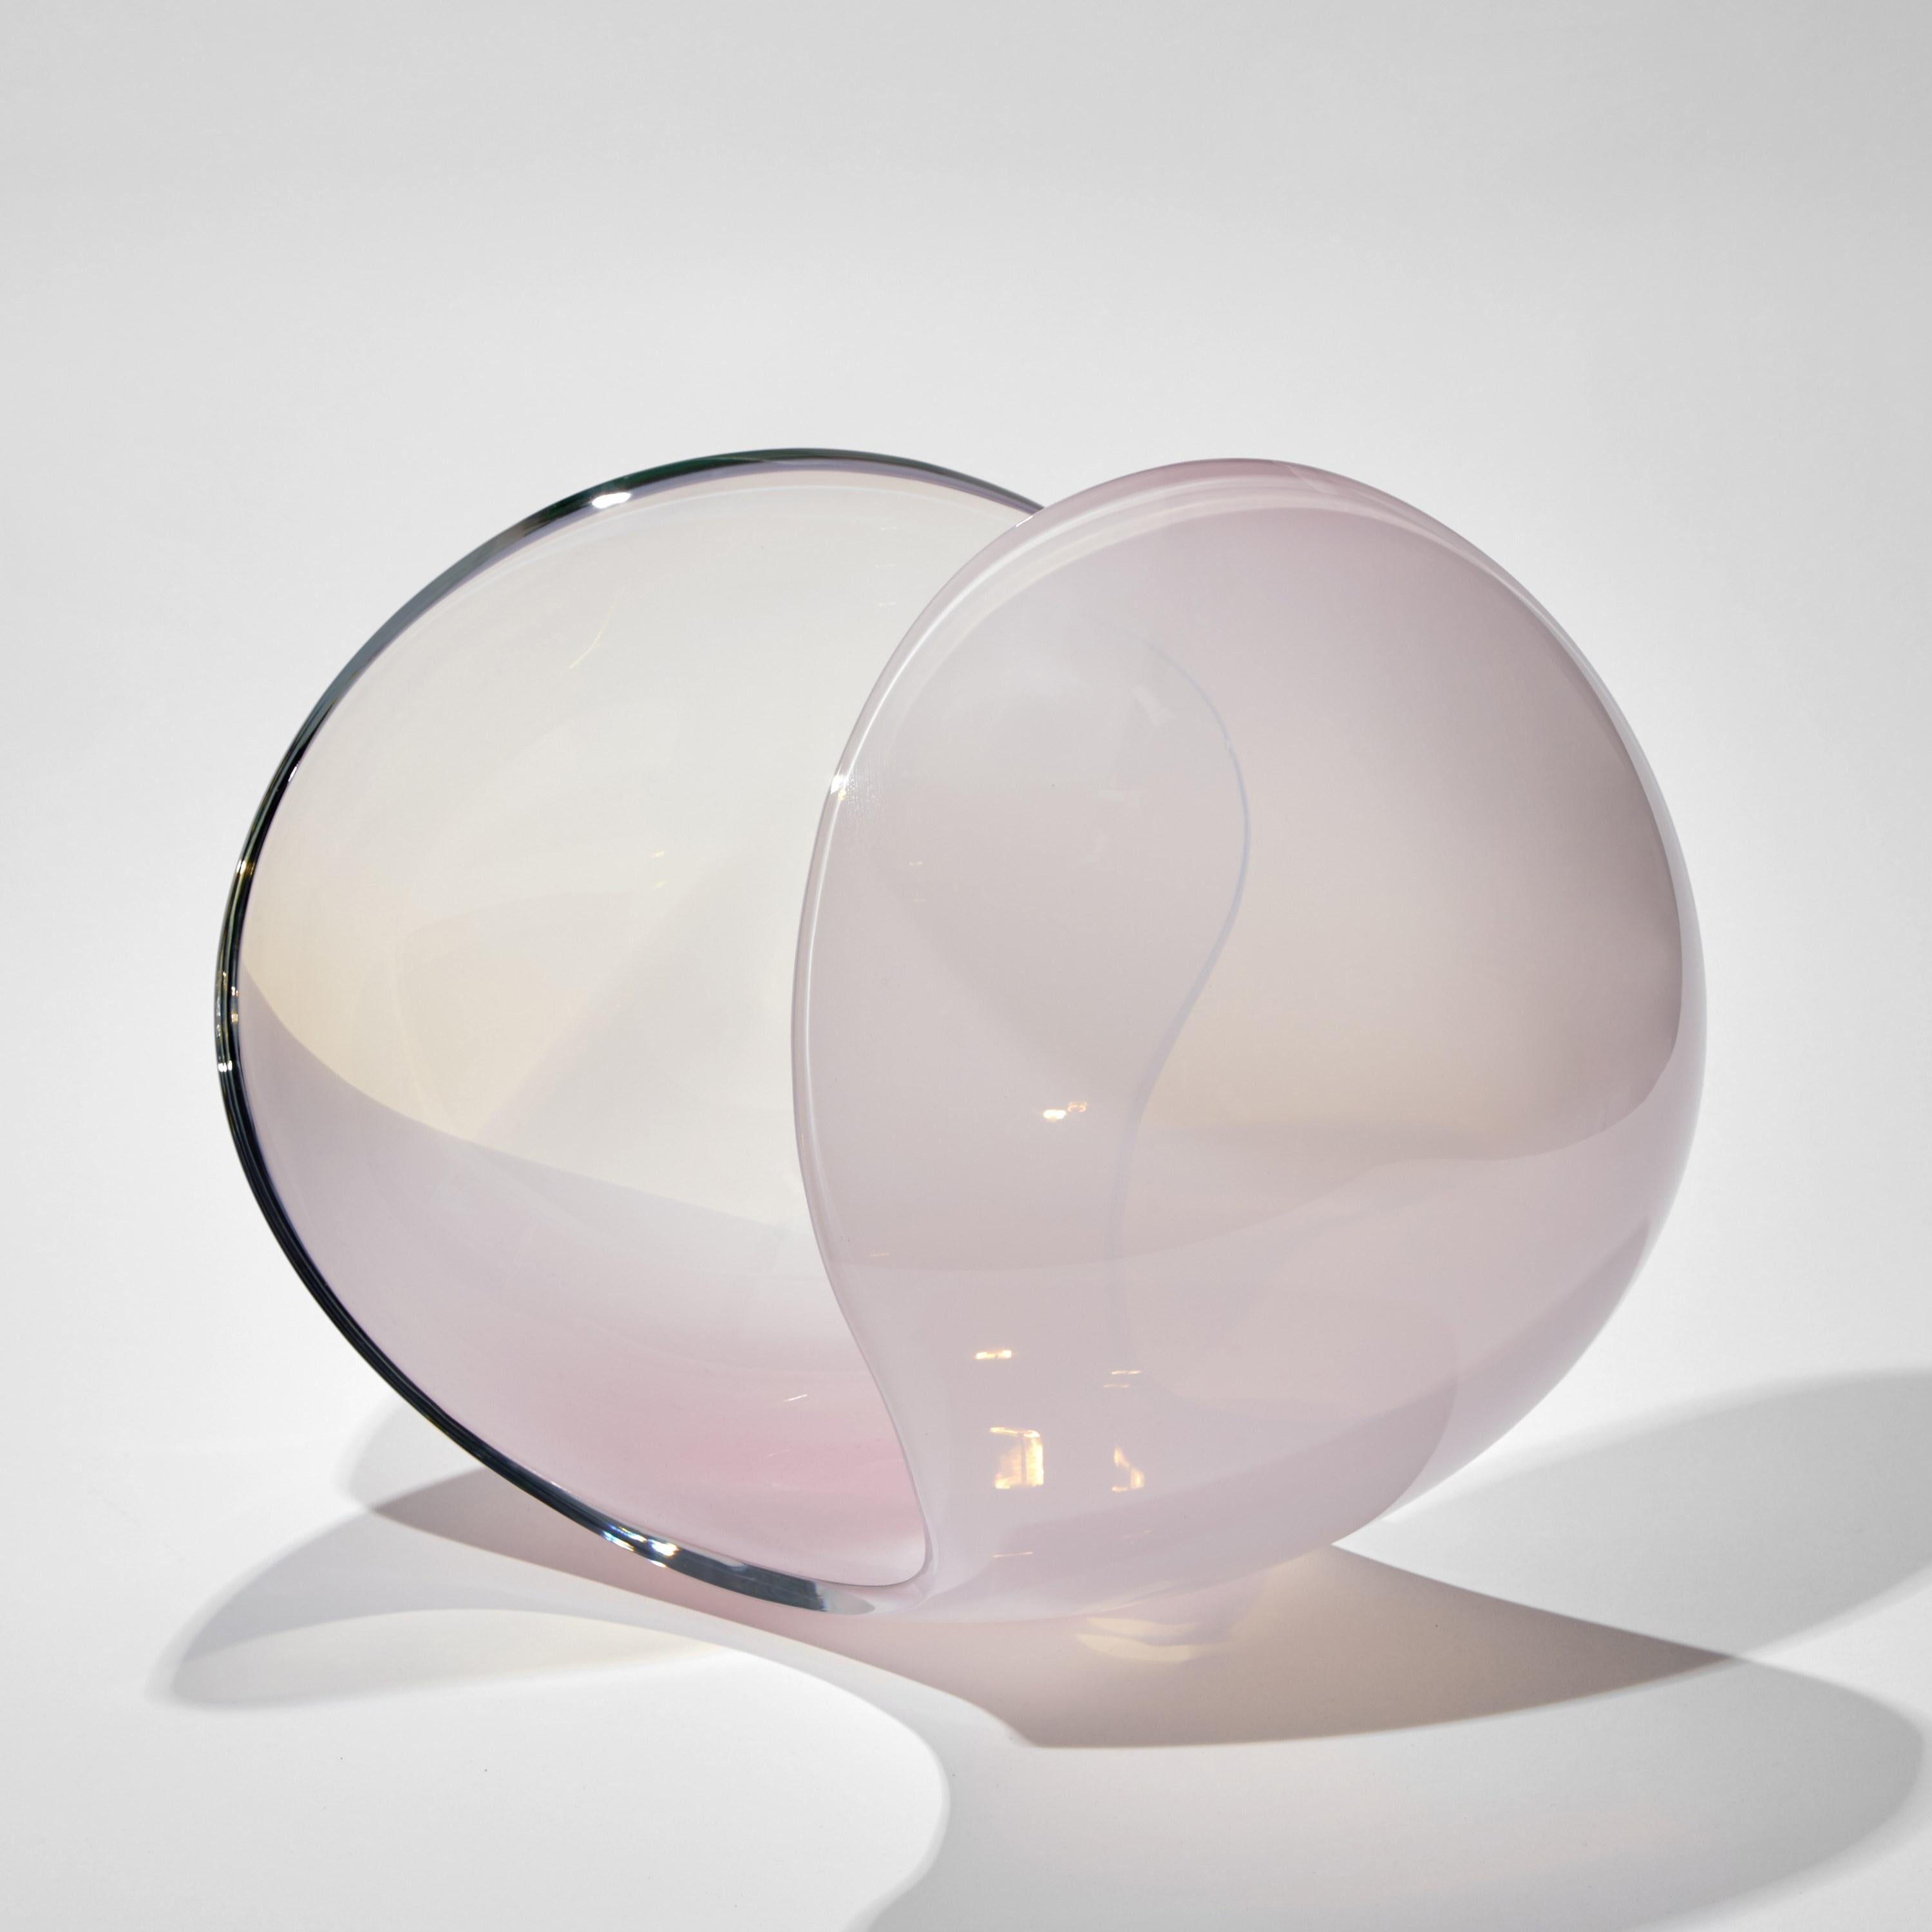 Hand-Crafted Planet in Soft Pink, a unique Glass Sculpture & Centrepiece by Lena Bergström For Sale